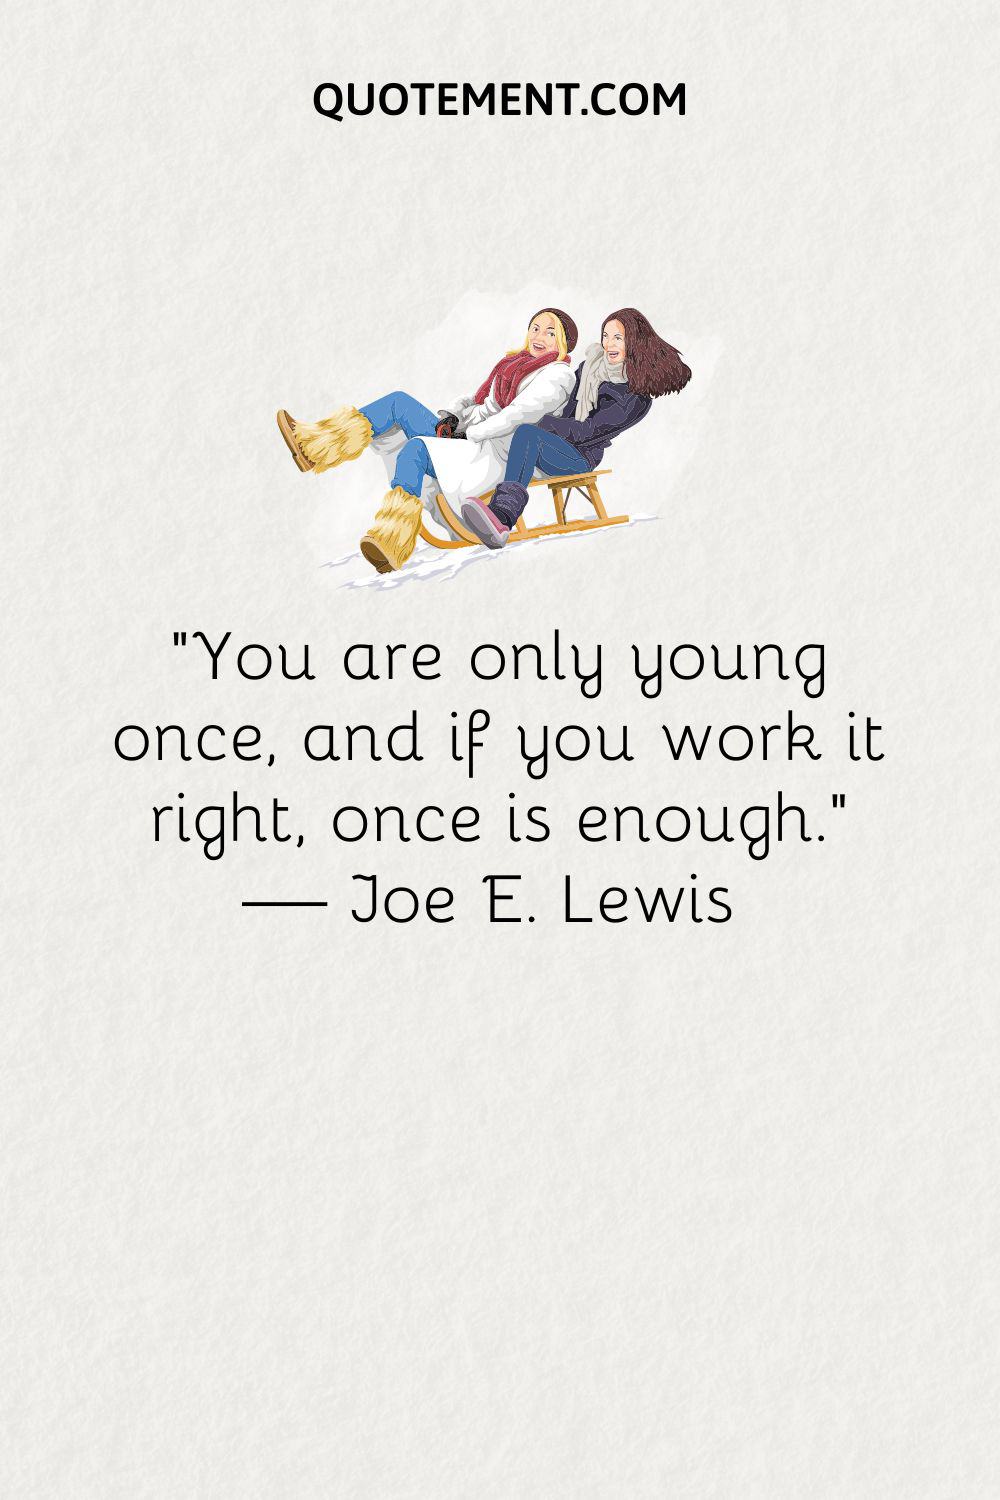 “You are only young once, and if you work it right, once is enough.” — Joe E. Lewis